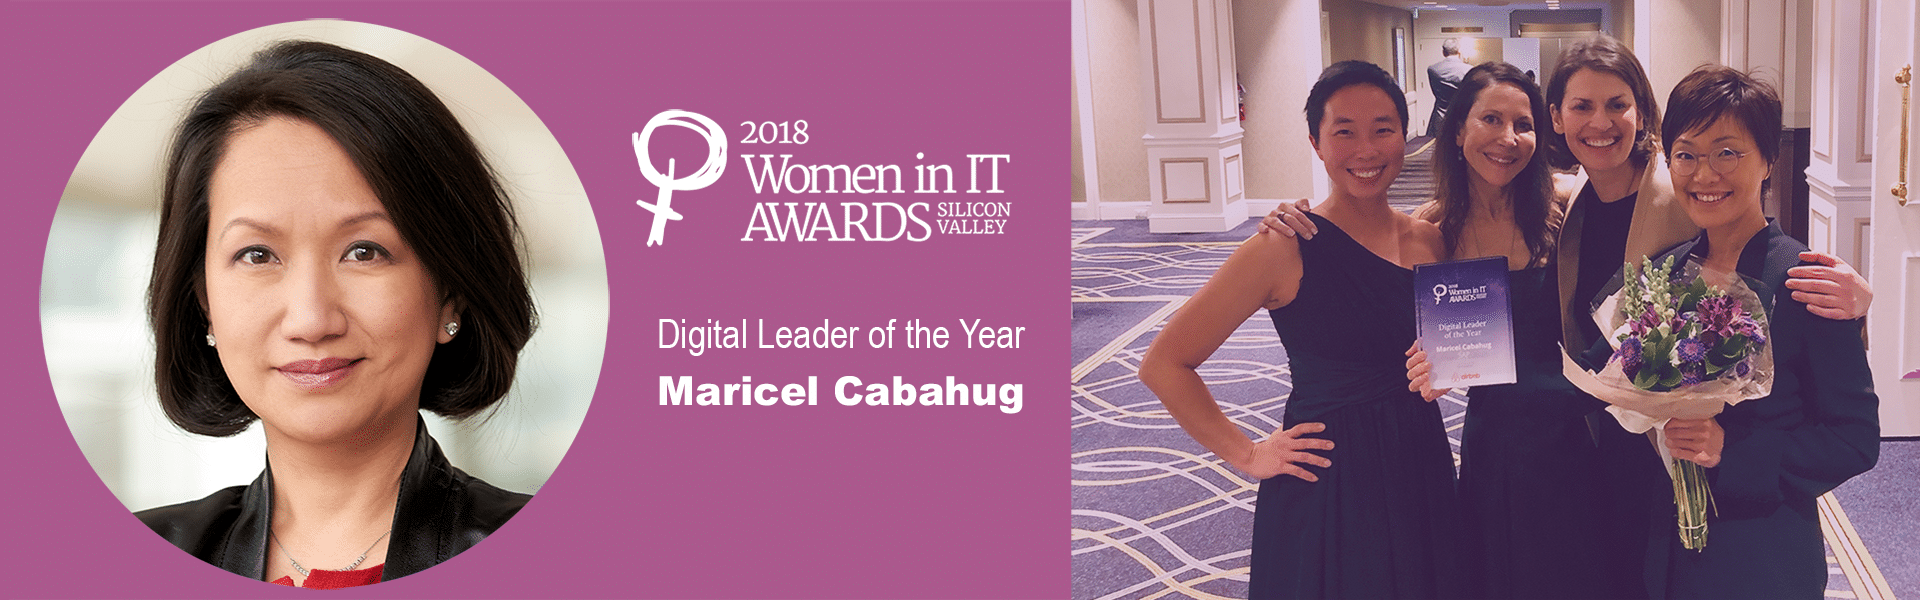 SAP Chief Design Officer Maricel Cabahug awarded Digital Leader of the Year